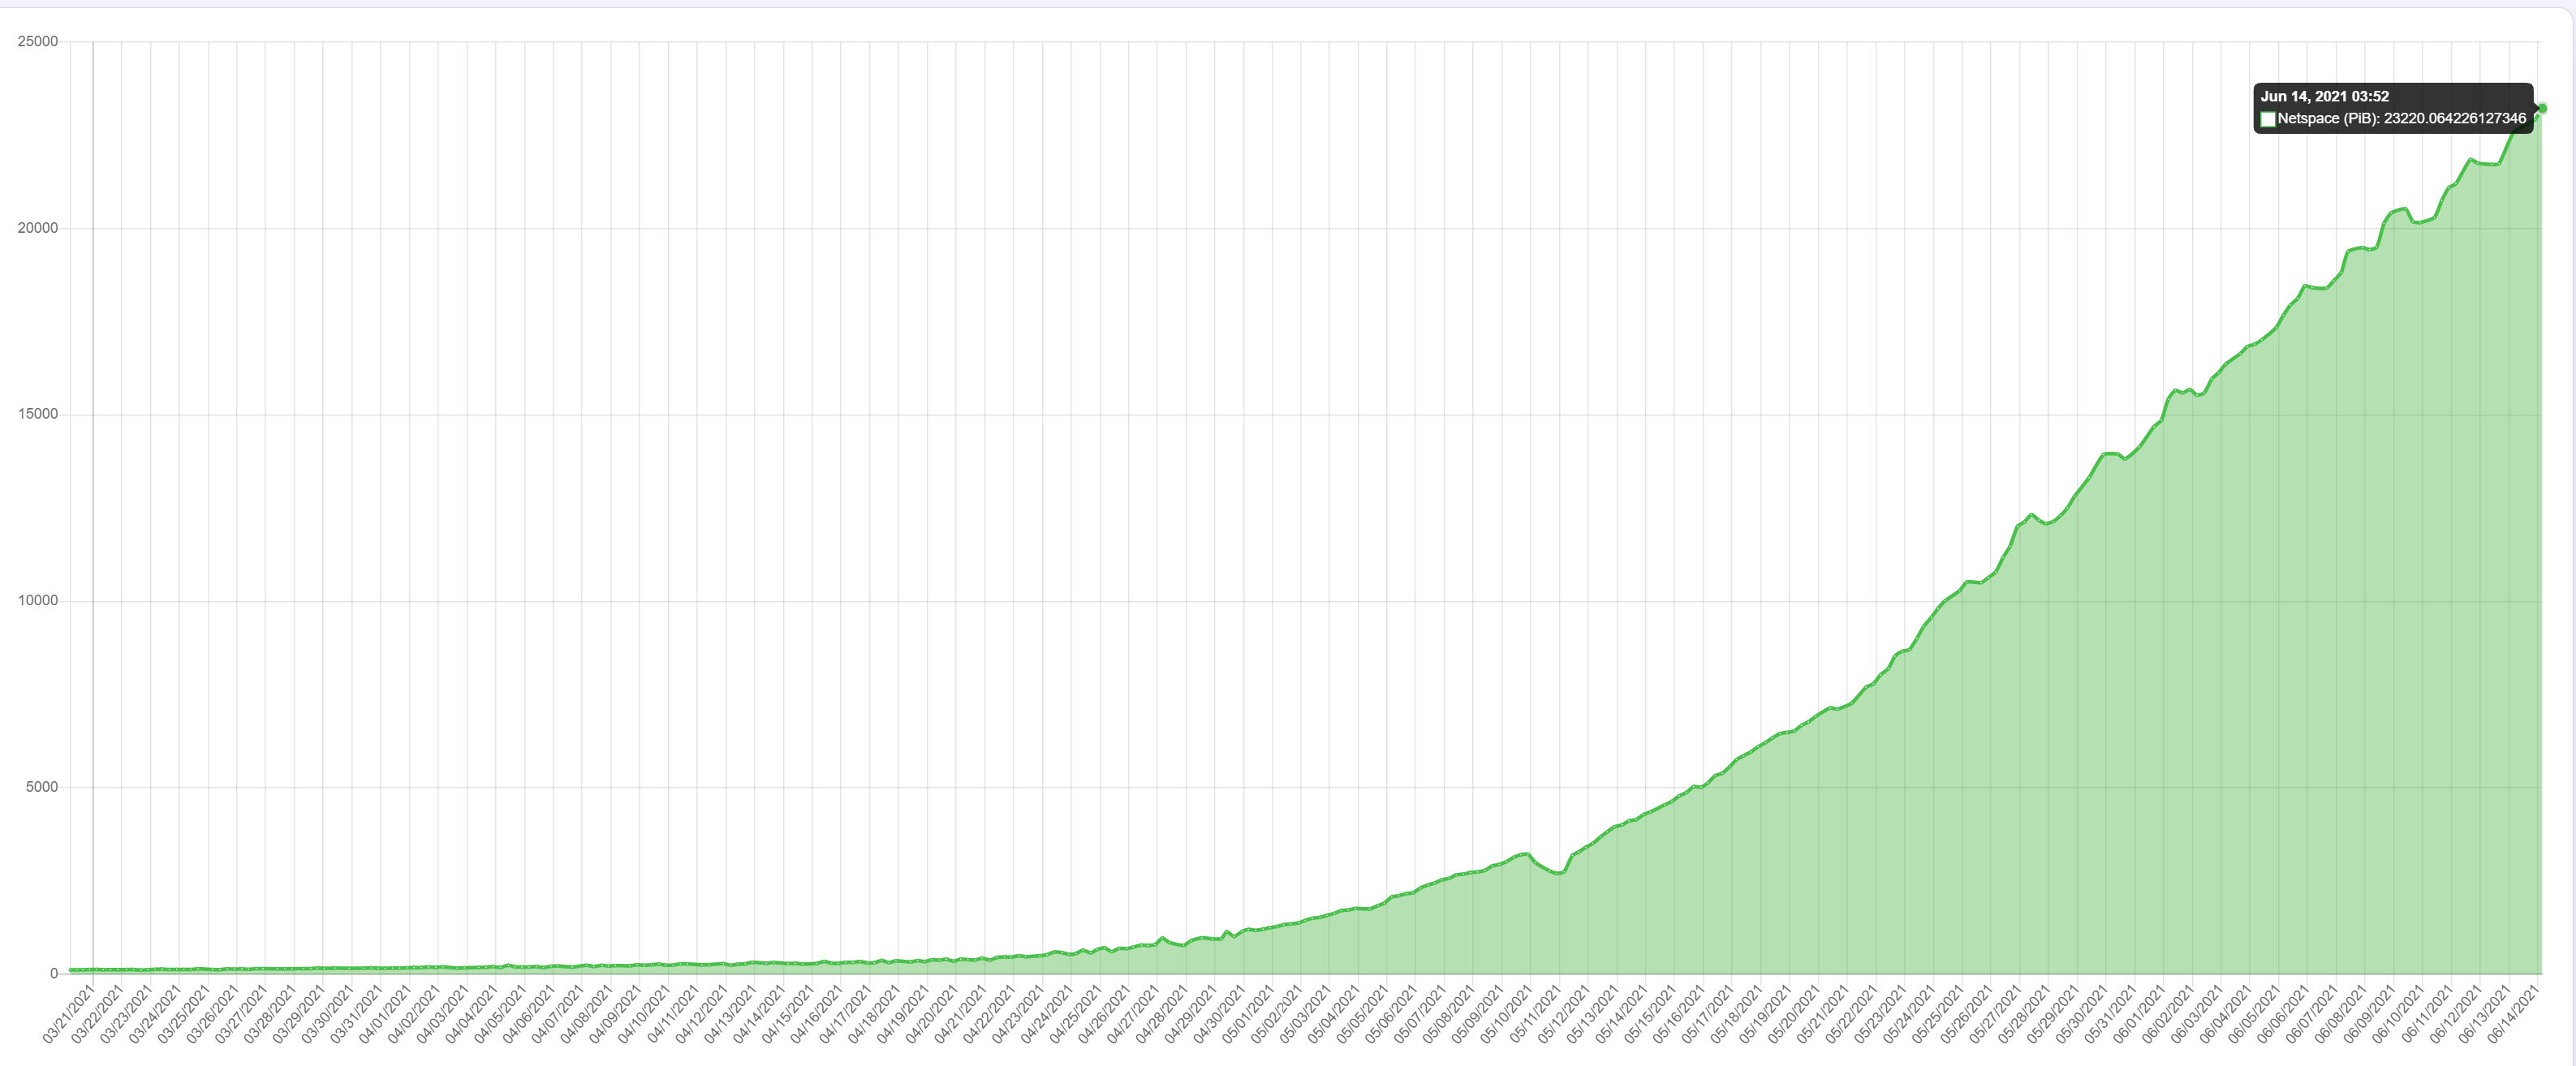 chia coin network growth